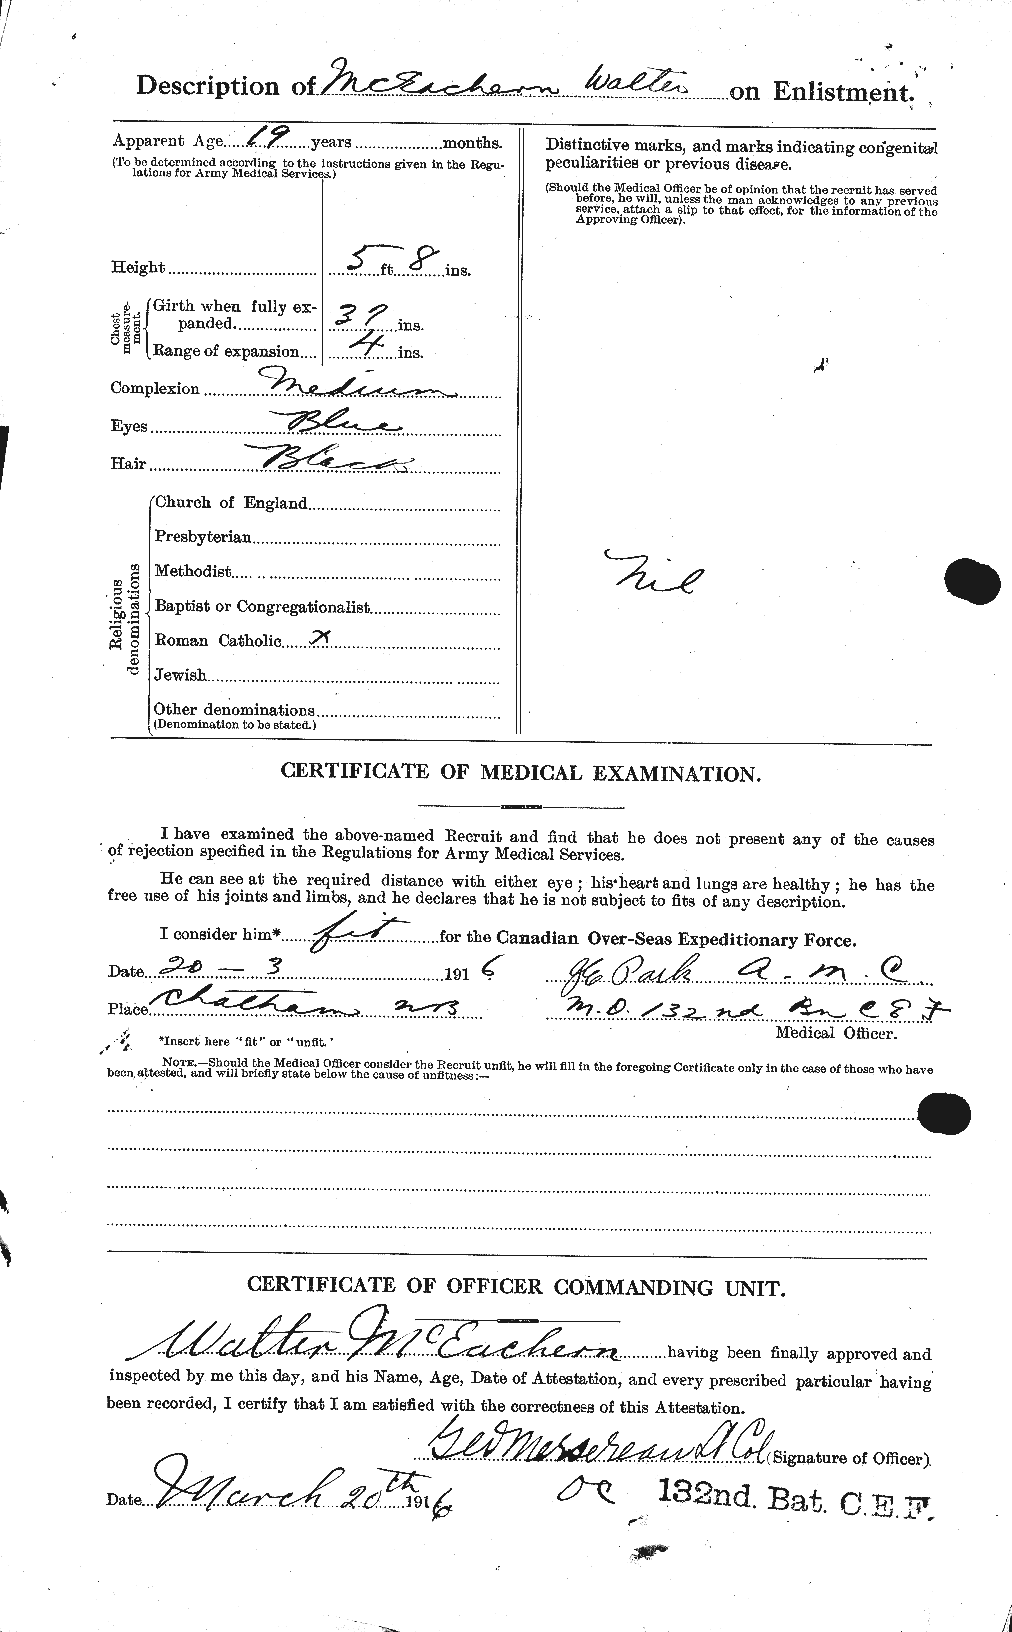 Personnel Records of the First World War - CEF 521914b